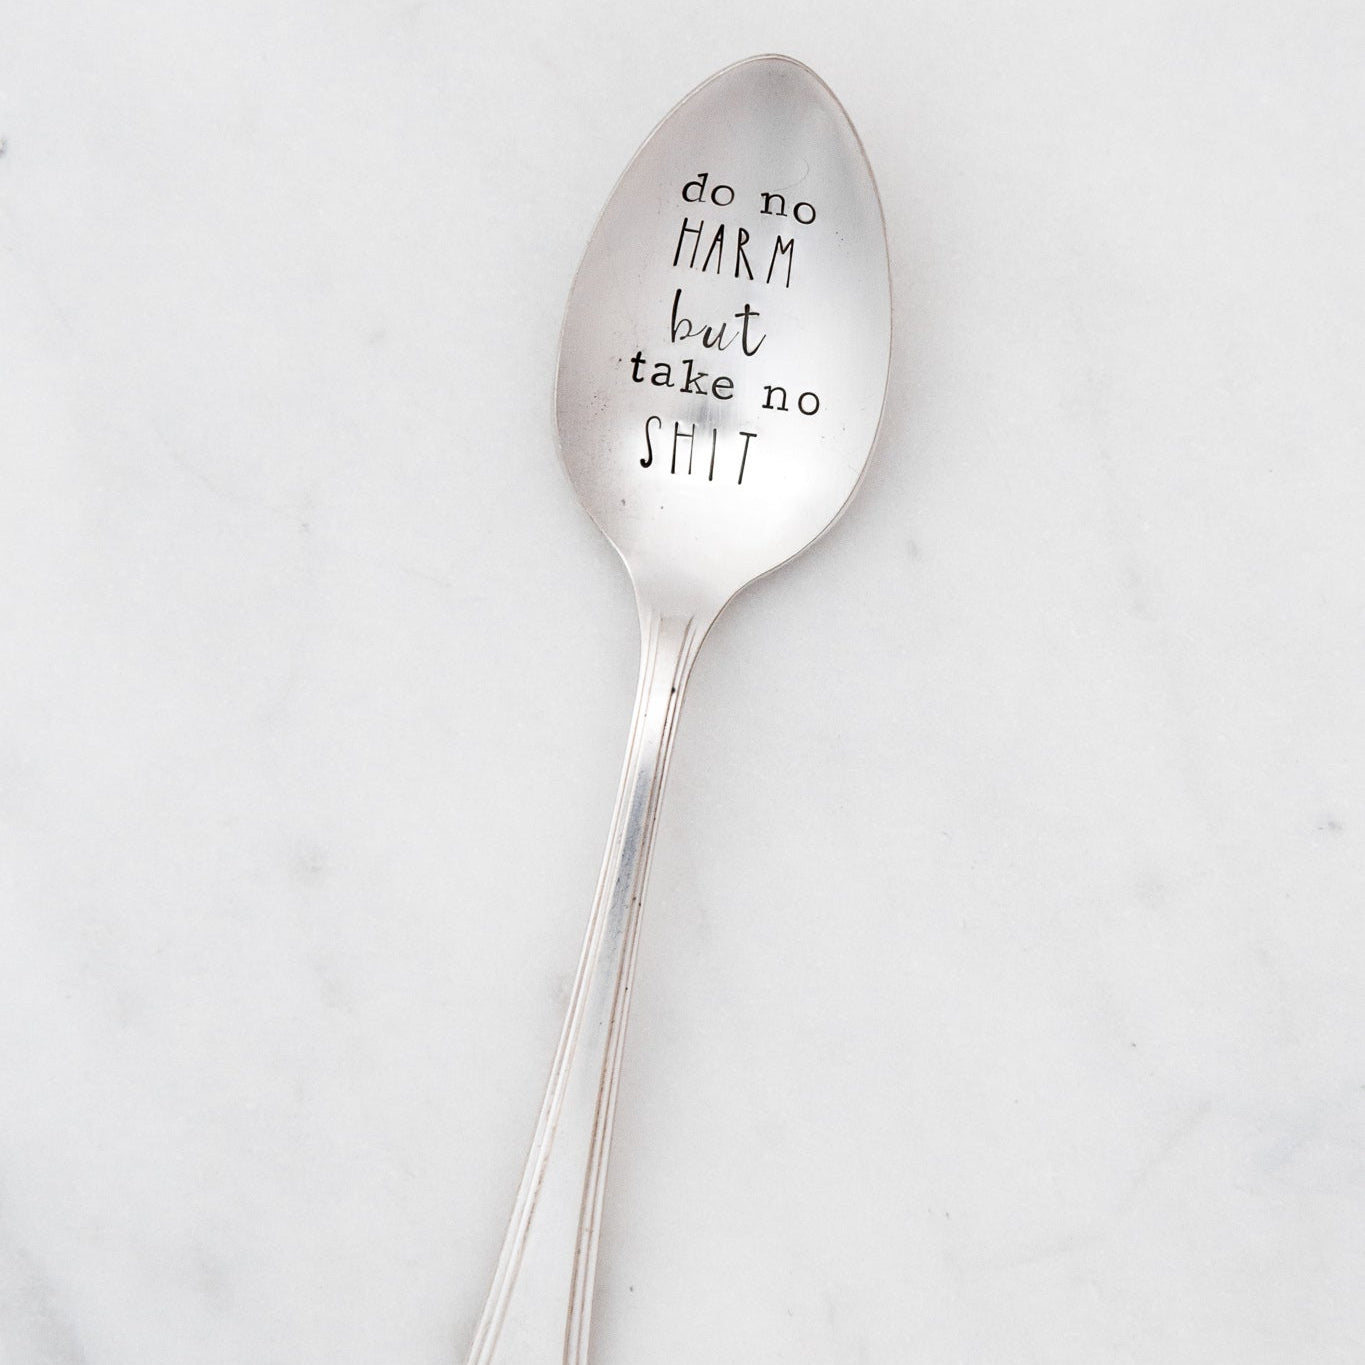 Do No Harm But Take No Shit, Hand Stamped Vintage Spoon Spoons callistafaye   